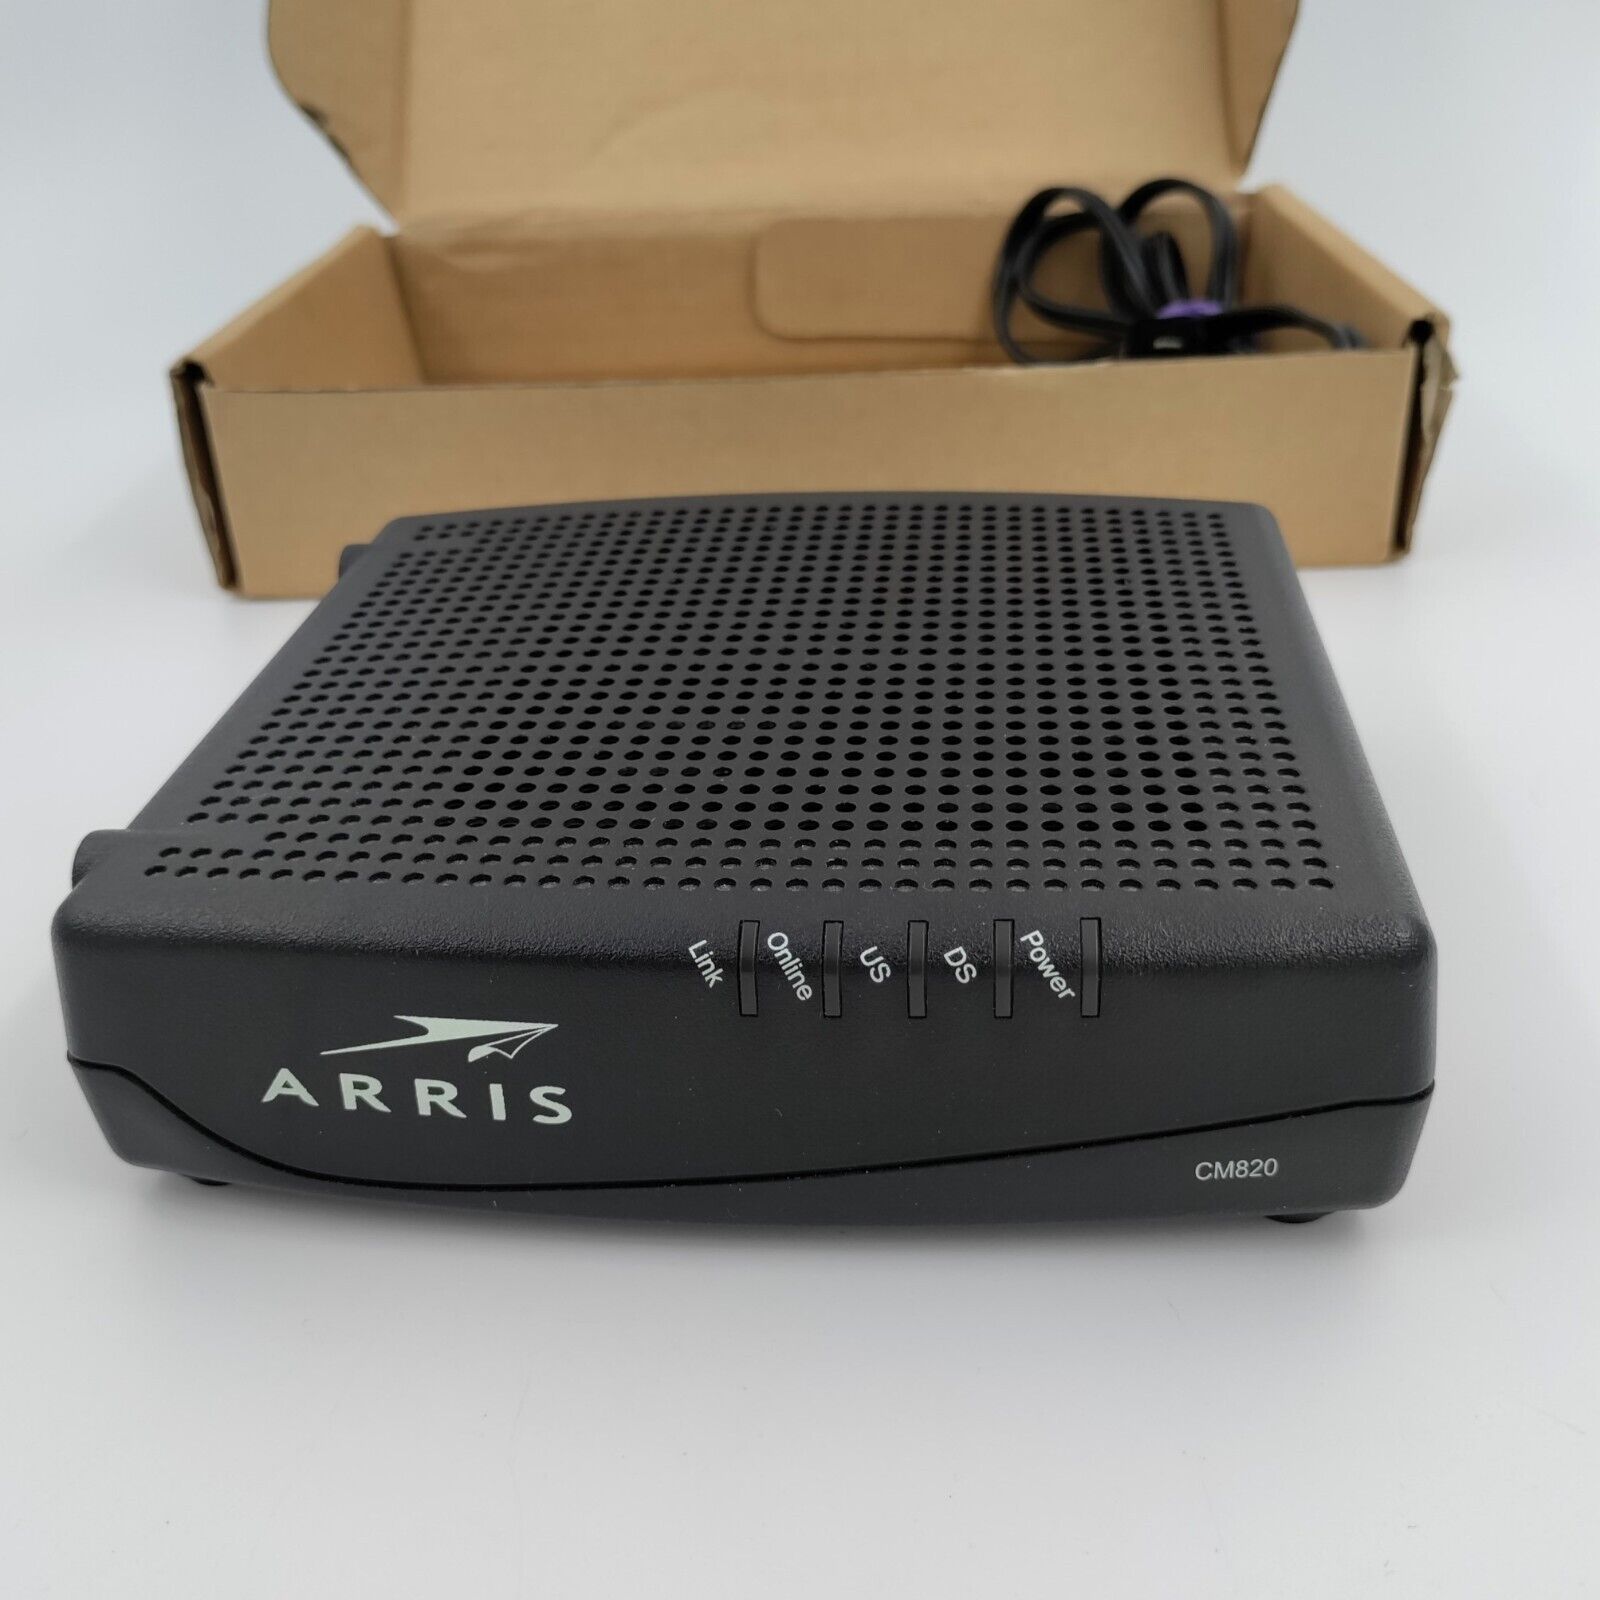 ARRIS Touchstone CM820A Cable Modem with Power Cable Black Color - TESTED